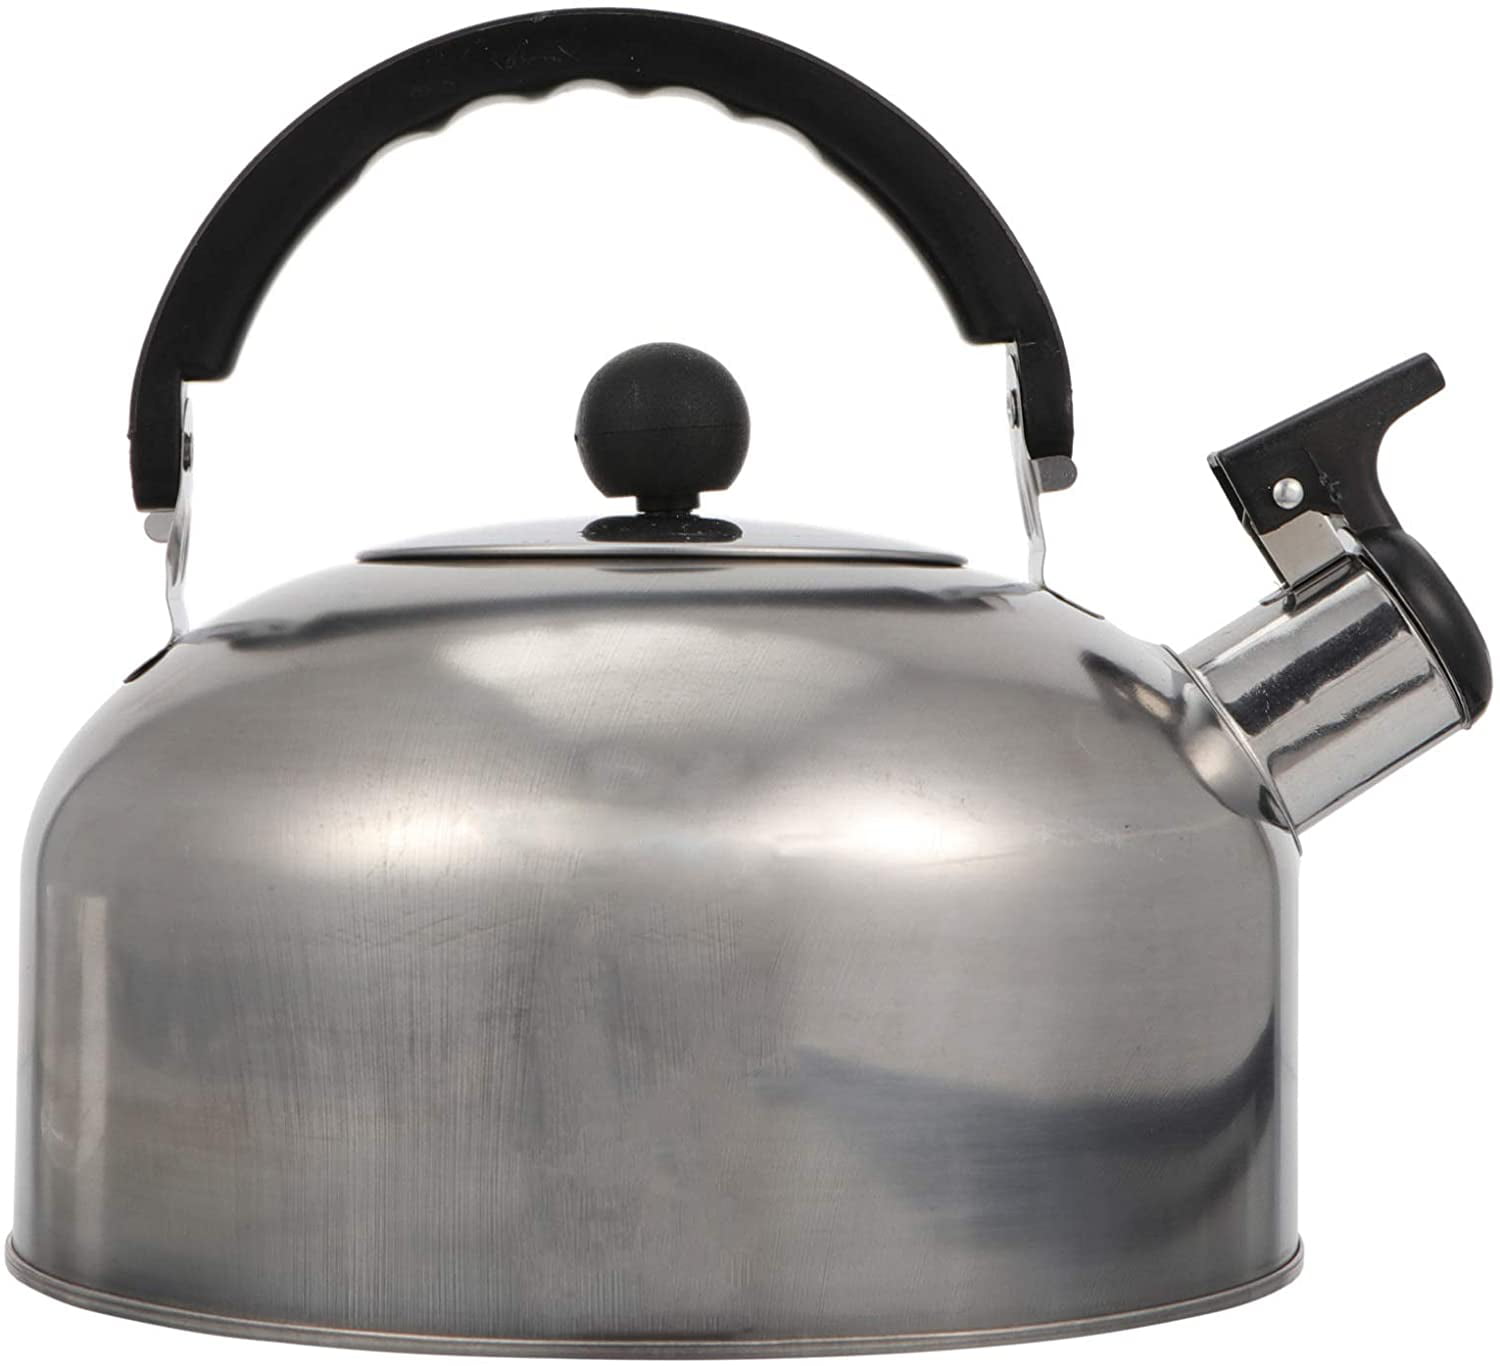 Tea Kettle Stove-top Stainless Steel Hot Water Kettle with Ergonomic Handle 3.7 Liter Whistling Teakettle 